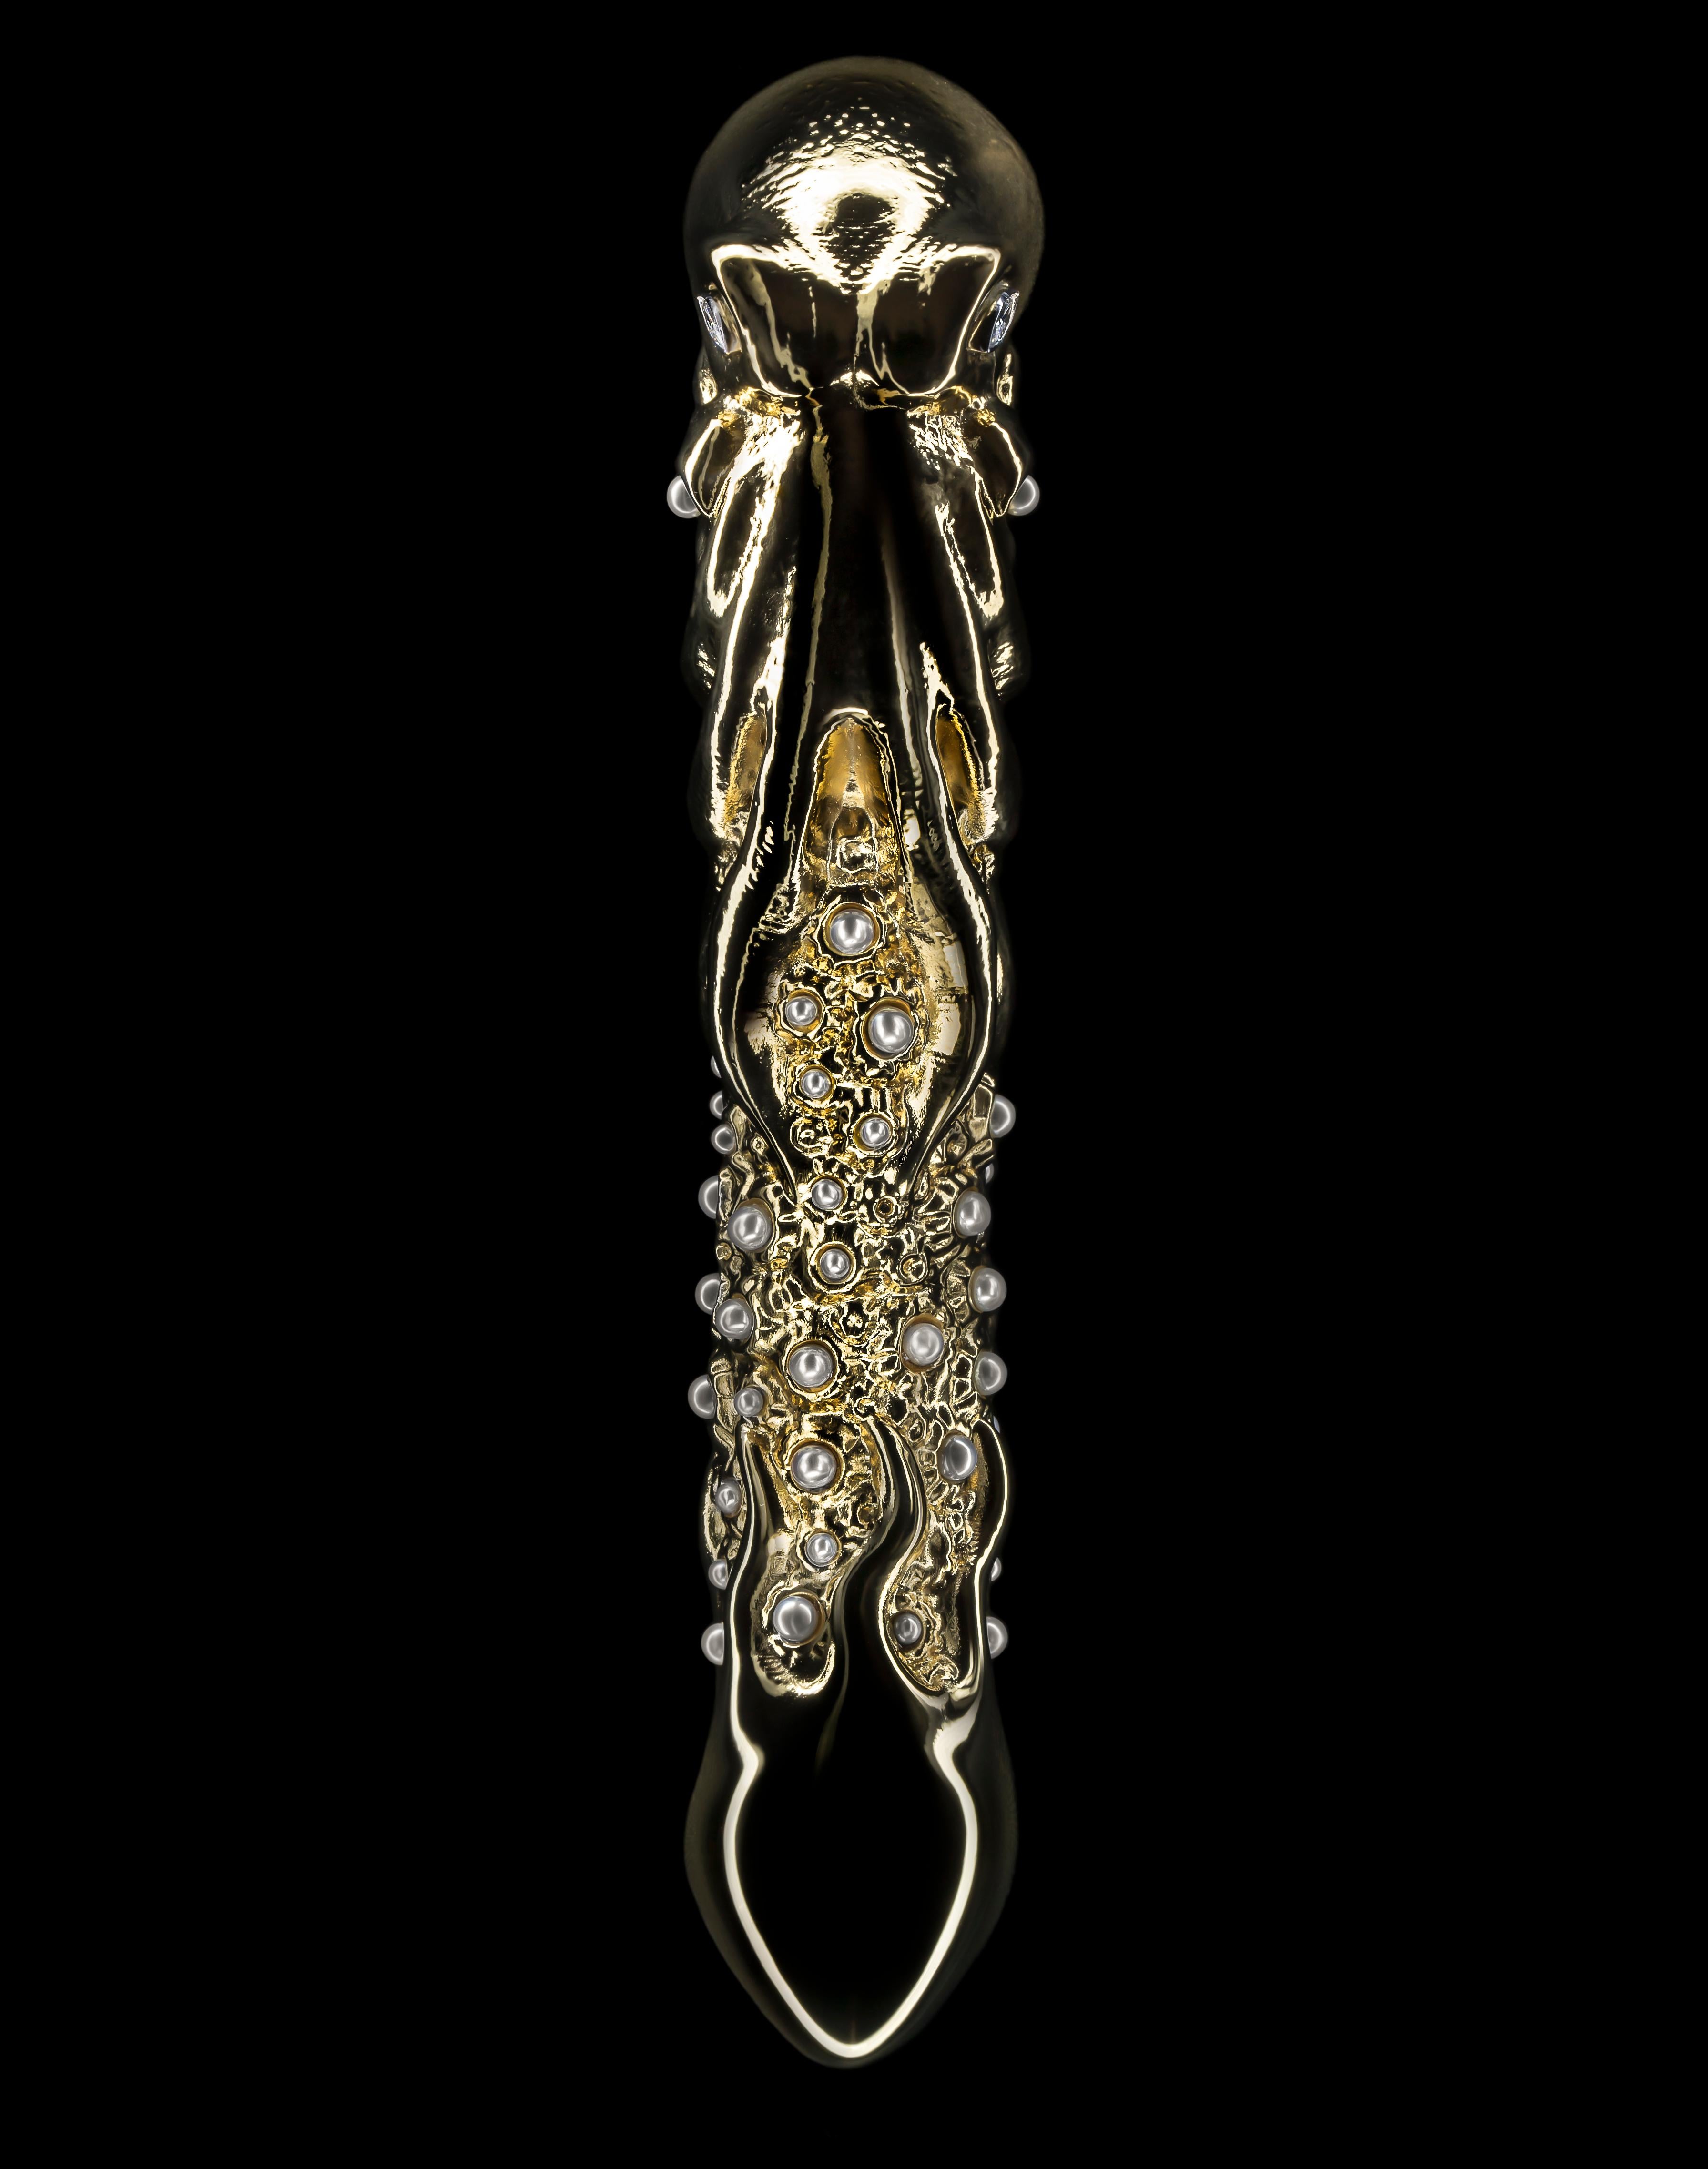 The Hokusai Dreaming Olisbos Sculpture, is electroformed from pure 24K gold and set with flawless marquise diamonds and natural sea pearls incorporated into a coral styled shaft. This unique erotic art piece was inspired by famous Japanese artist